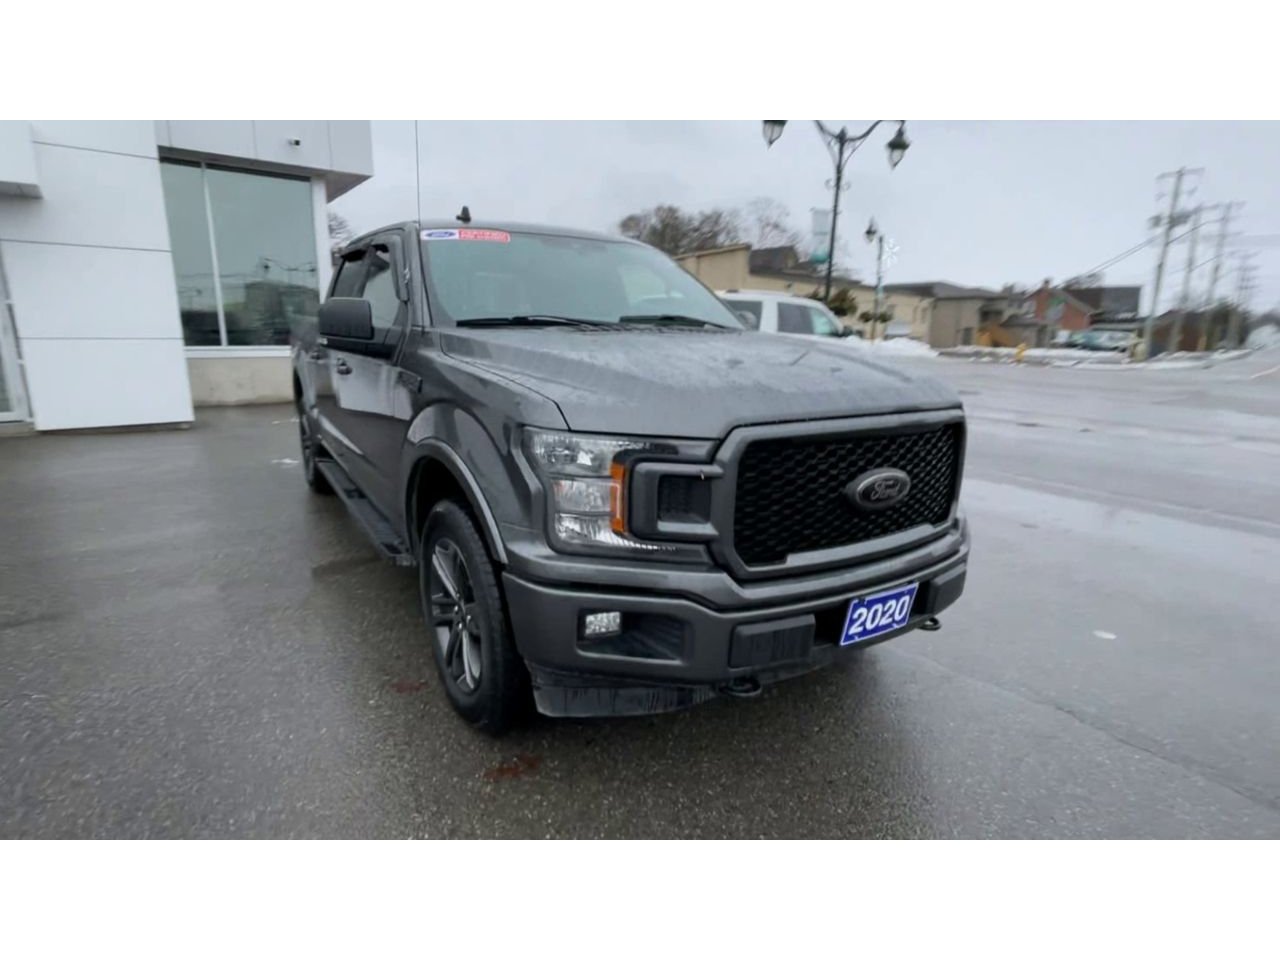 2020 Ford F-150 - P21579A Full Image 3